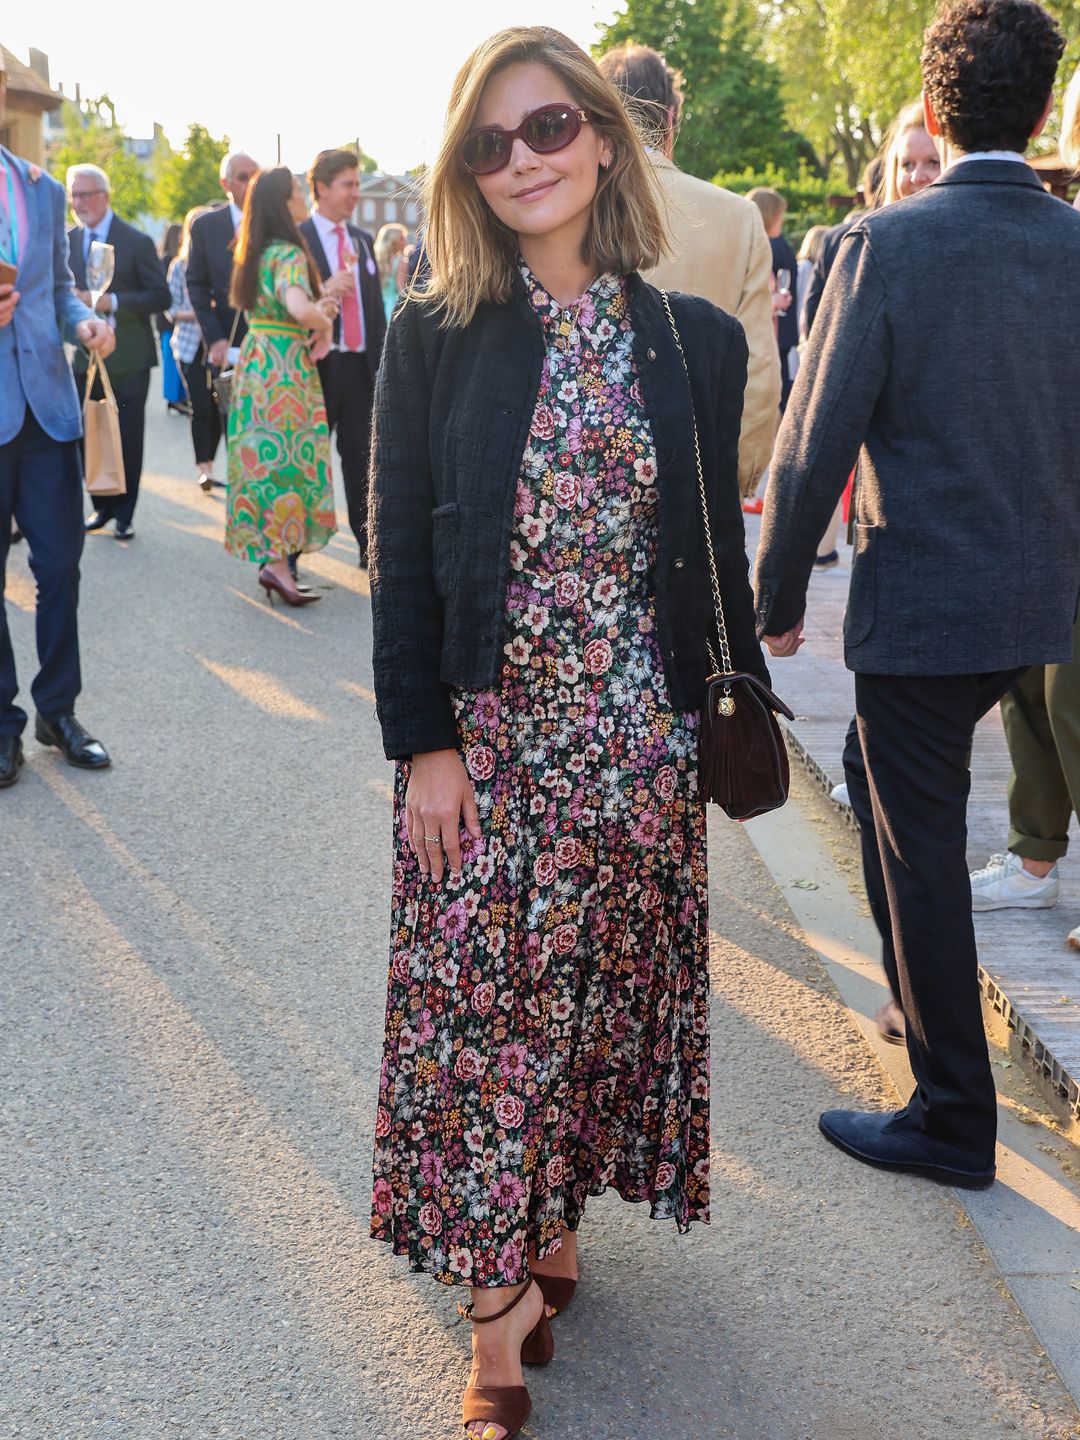 Jenna Coleman nails 'garden party chic' at the Chelsea Flower Show 